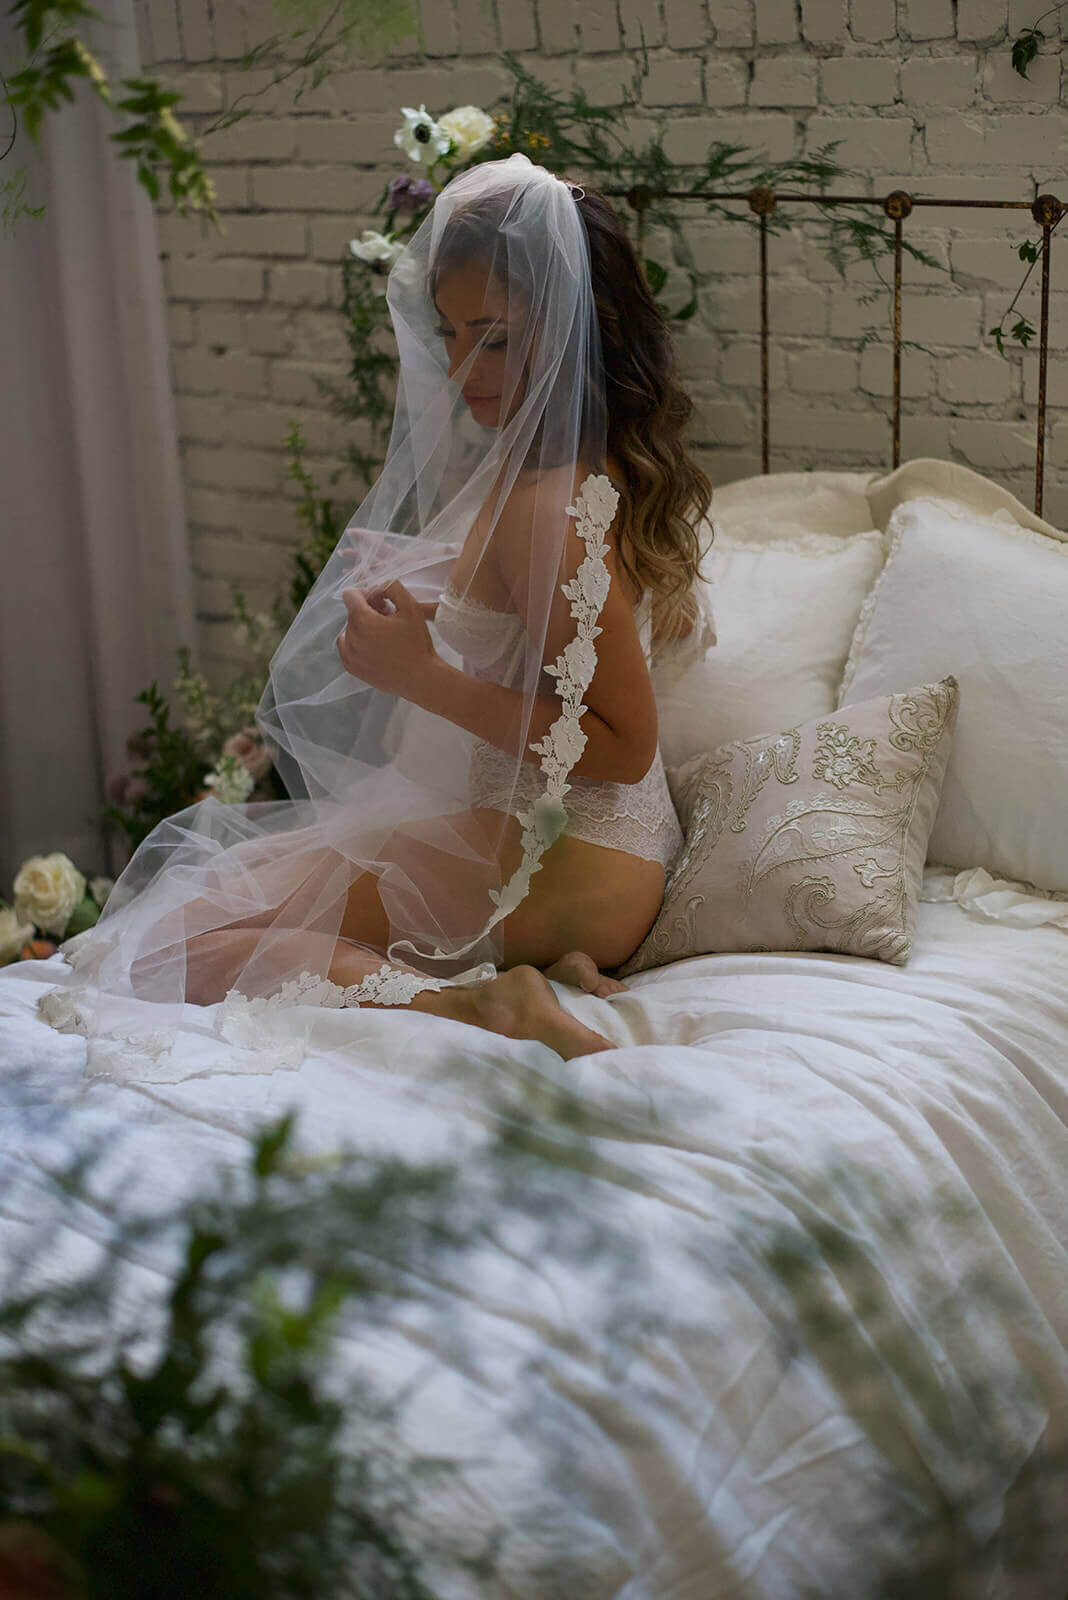 Woman in white lace lingerie on bed with wedding veil over her head